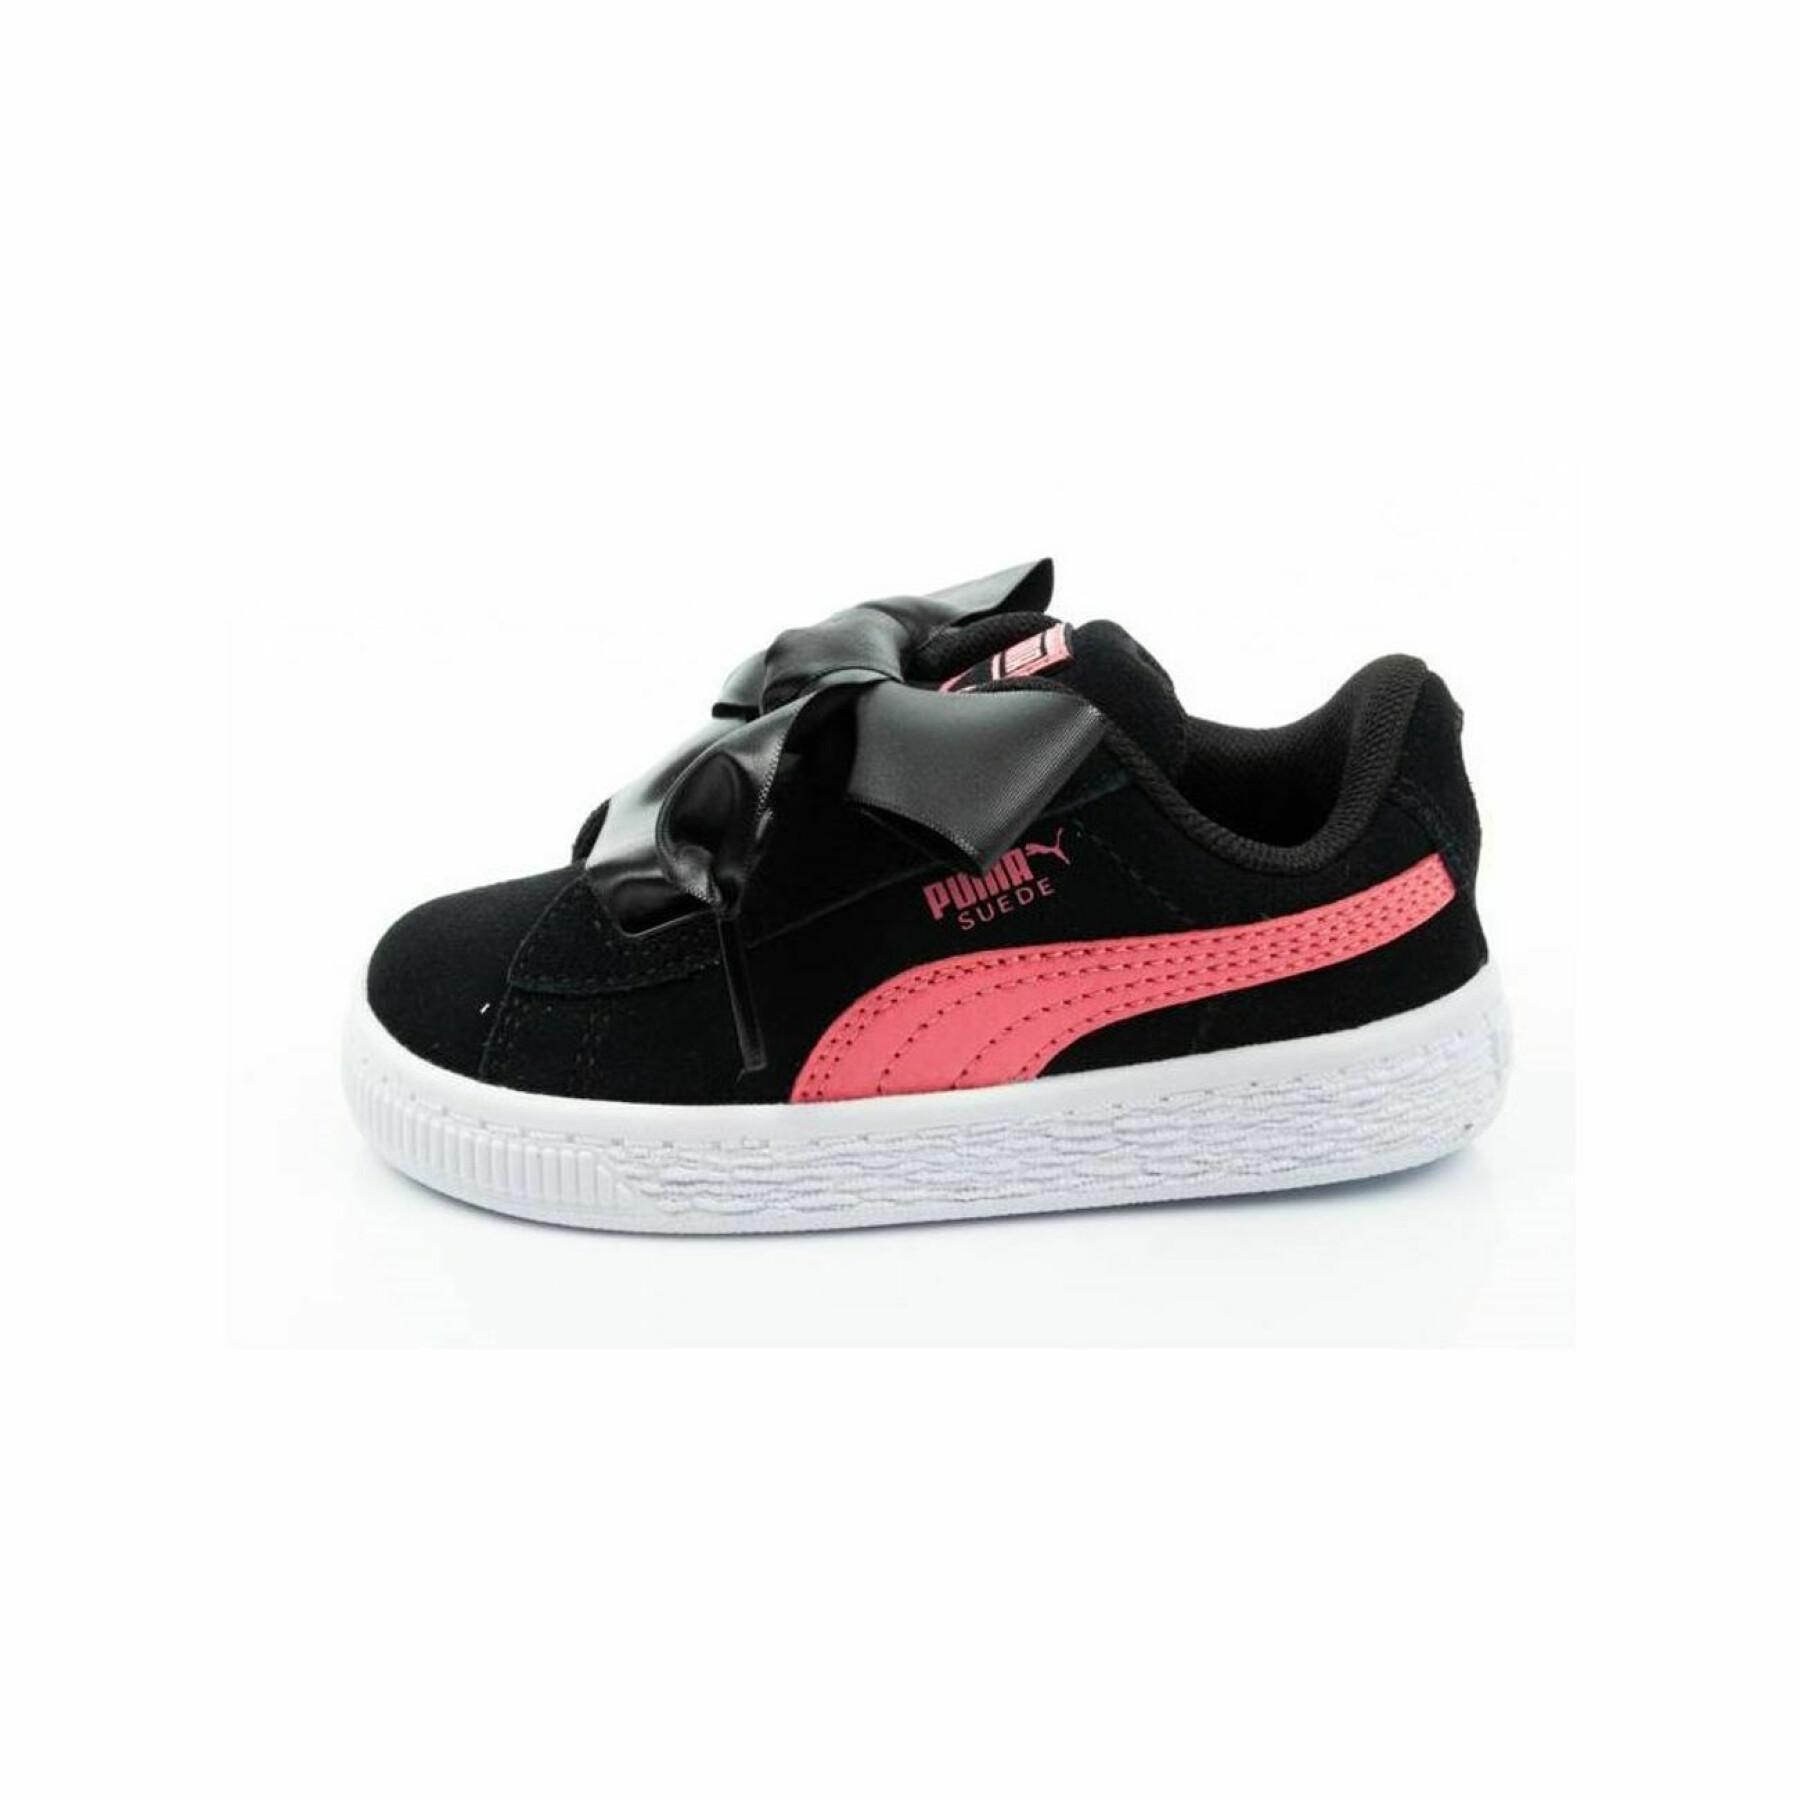 Baby girl sneakers Puma Heart Cires